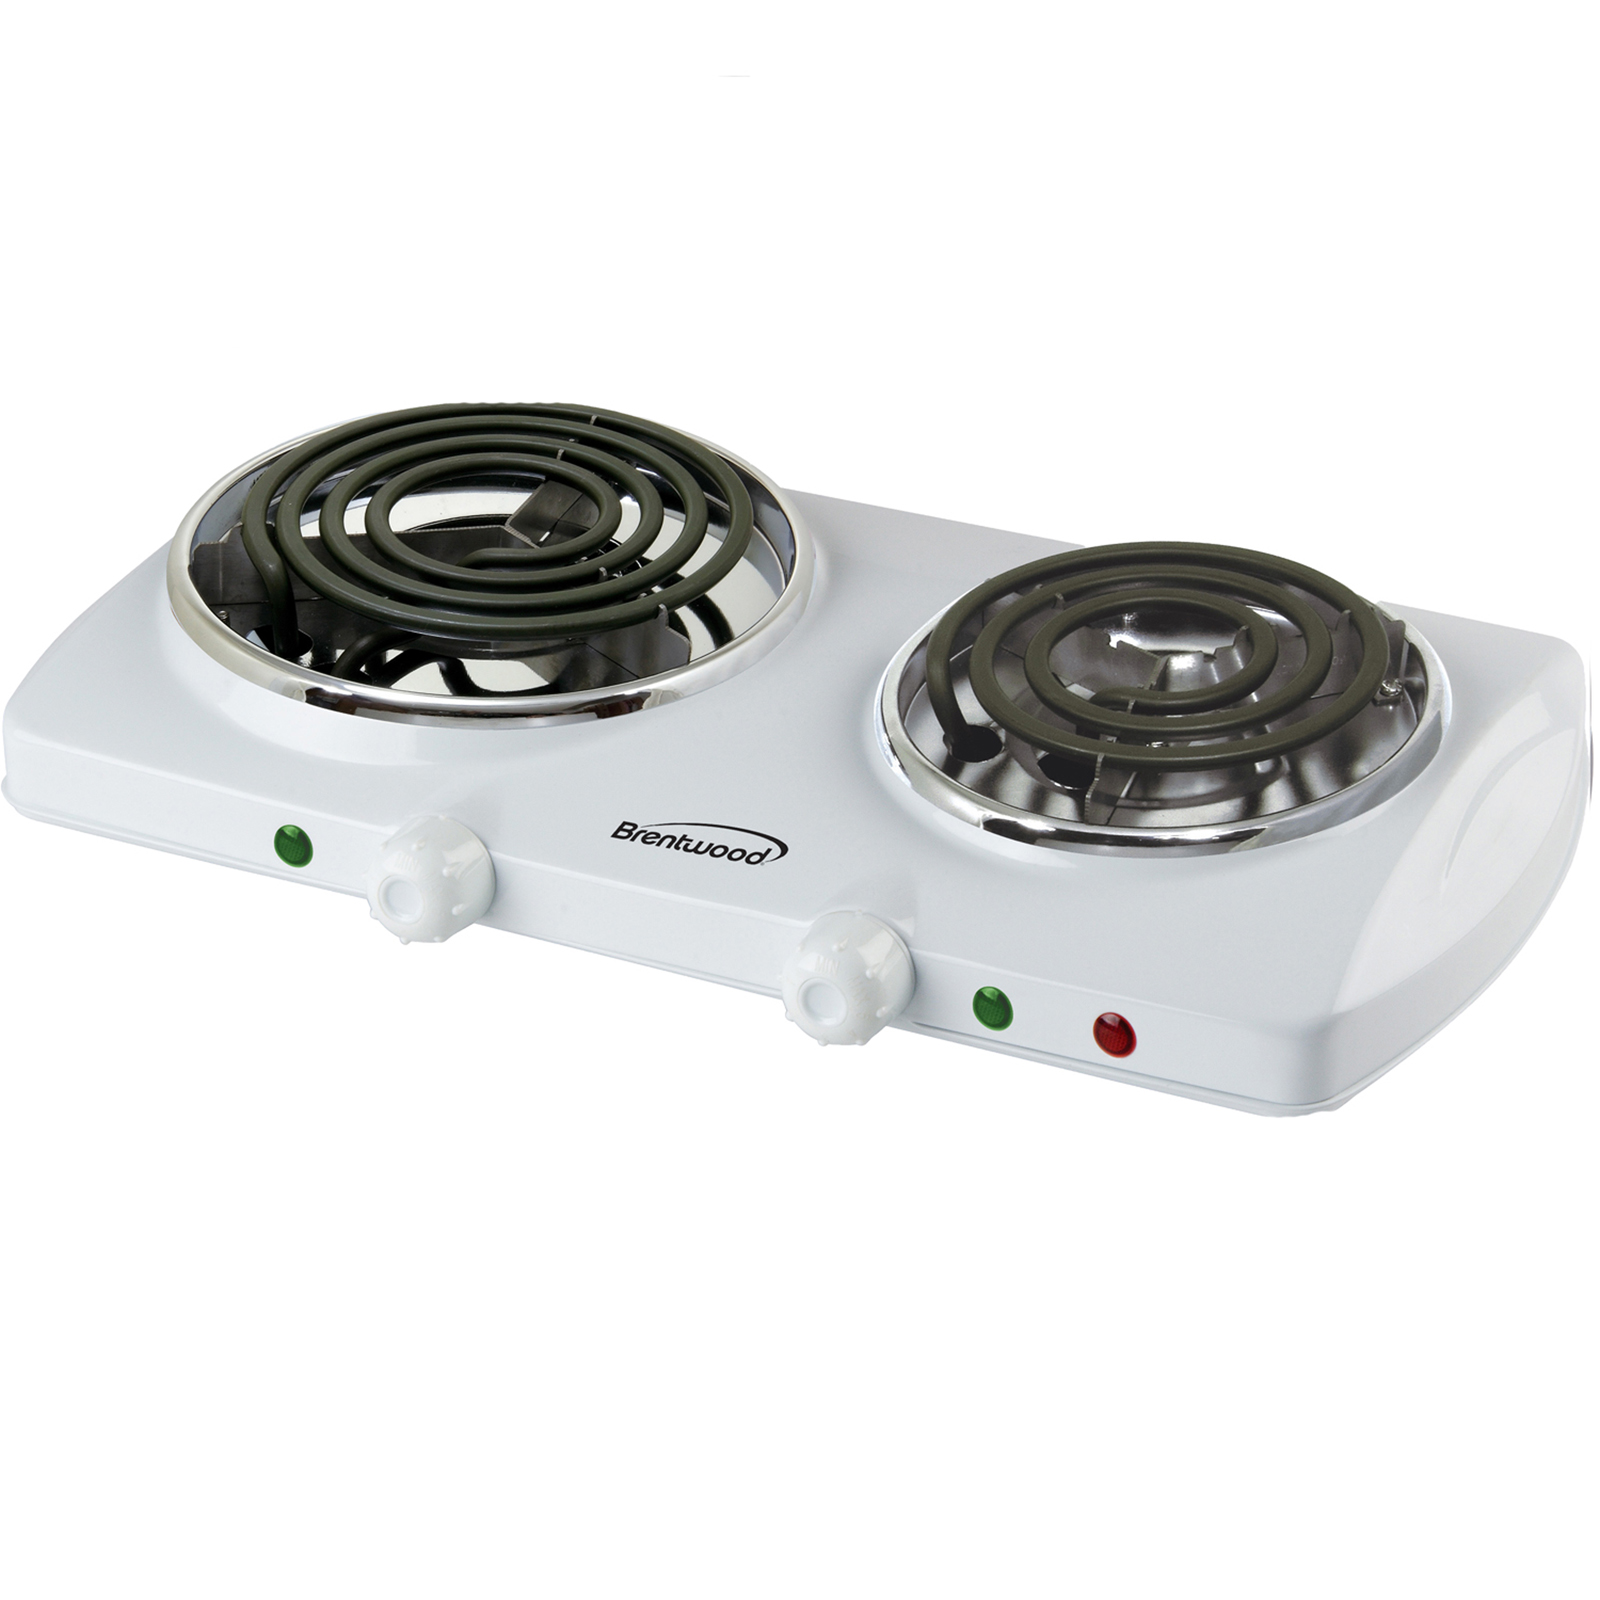 Brentwood 97083281M Electric 1500W Double Burner Spiral White